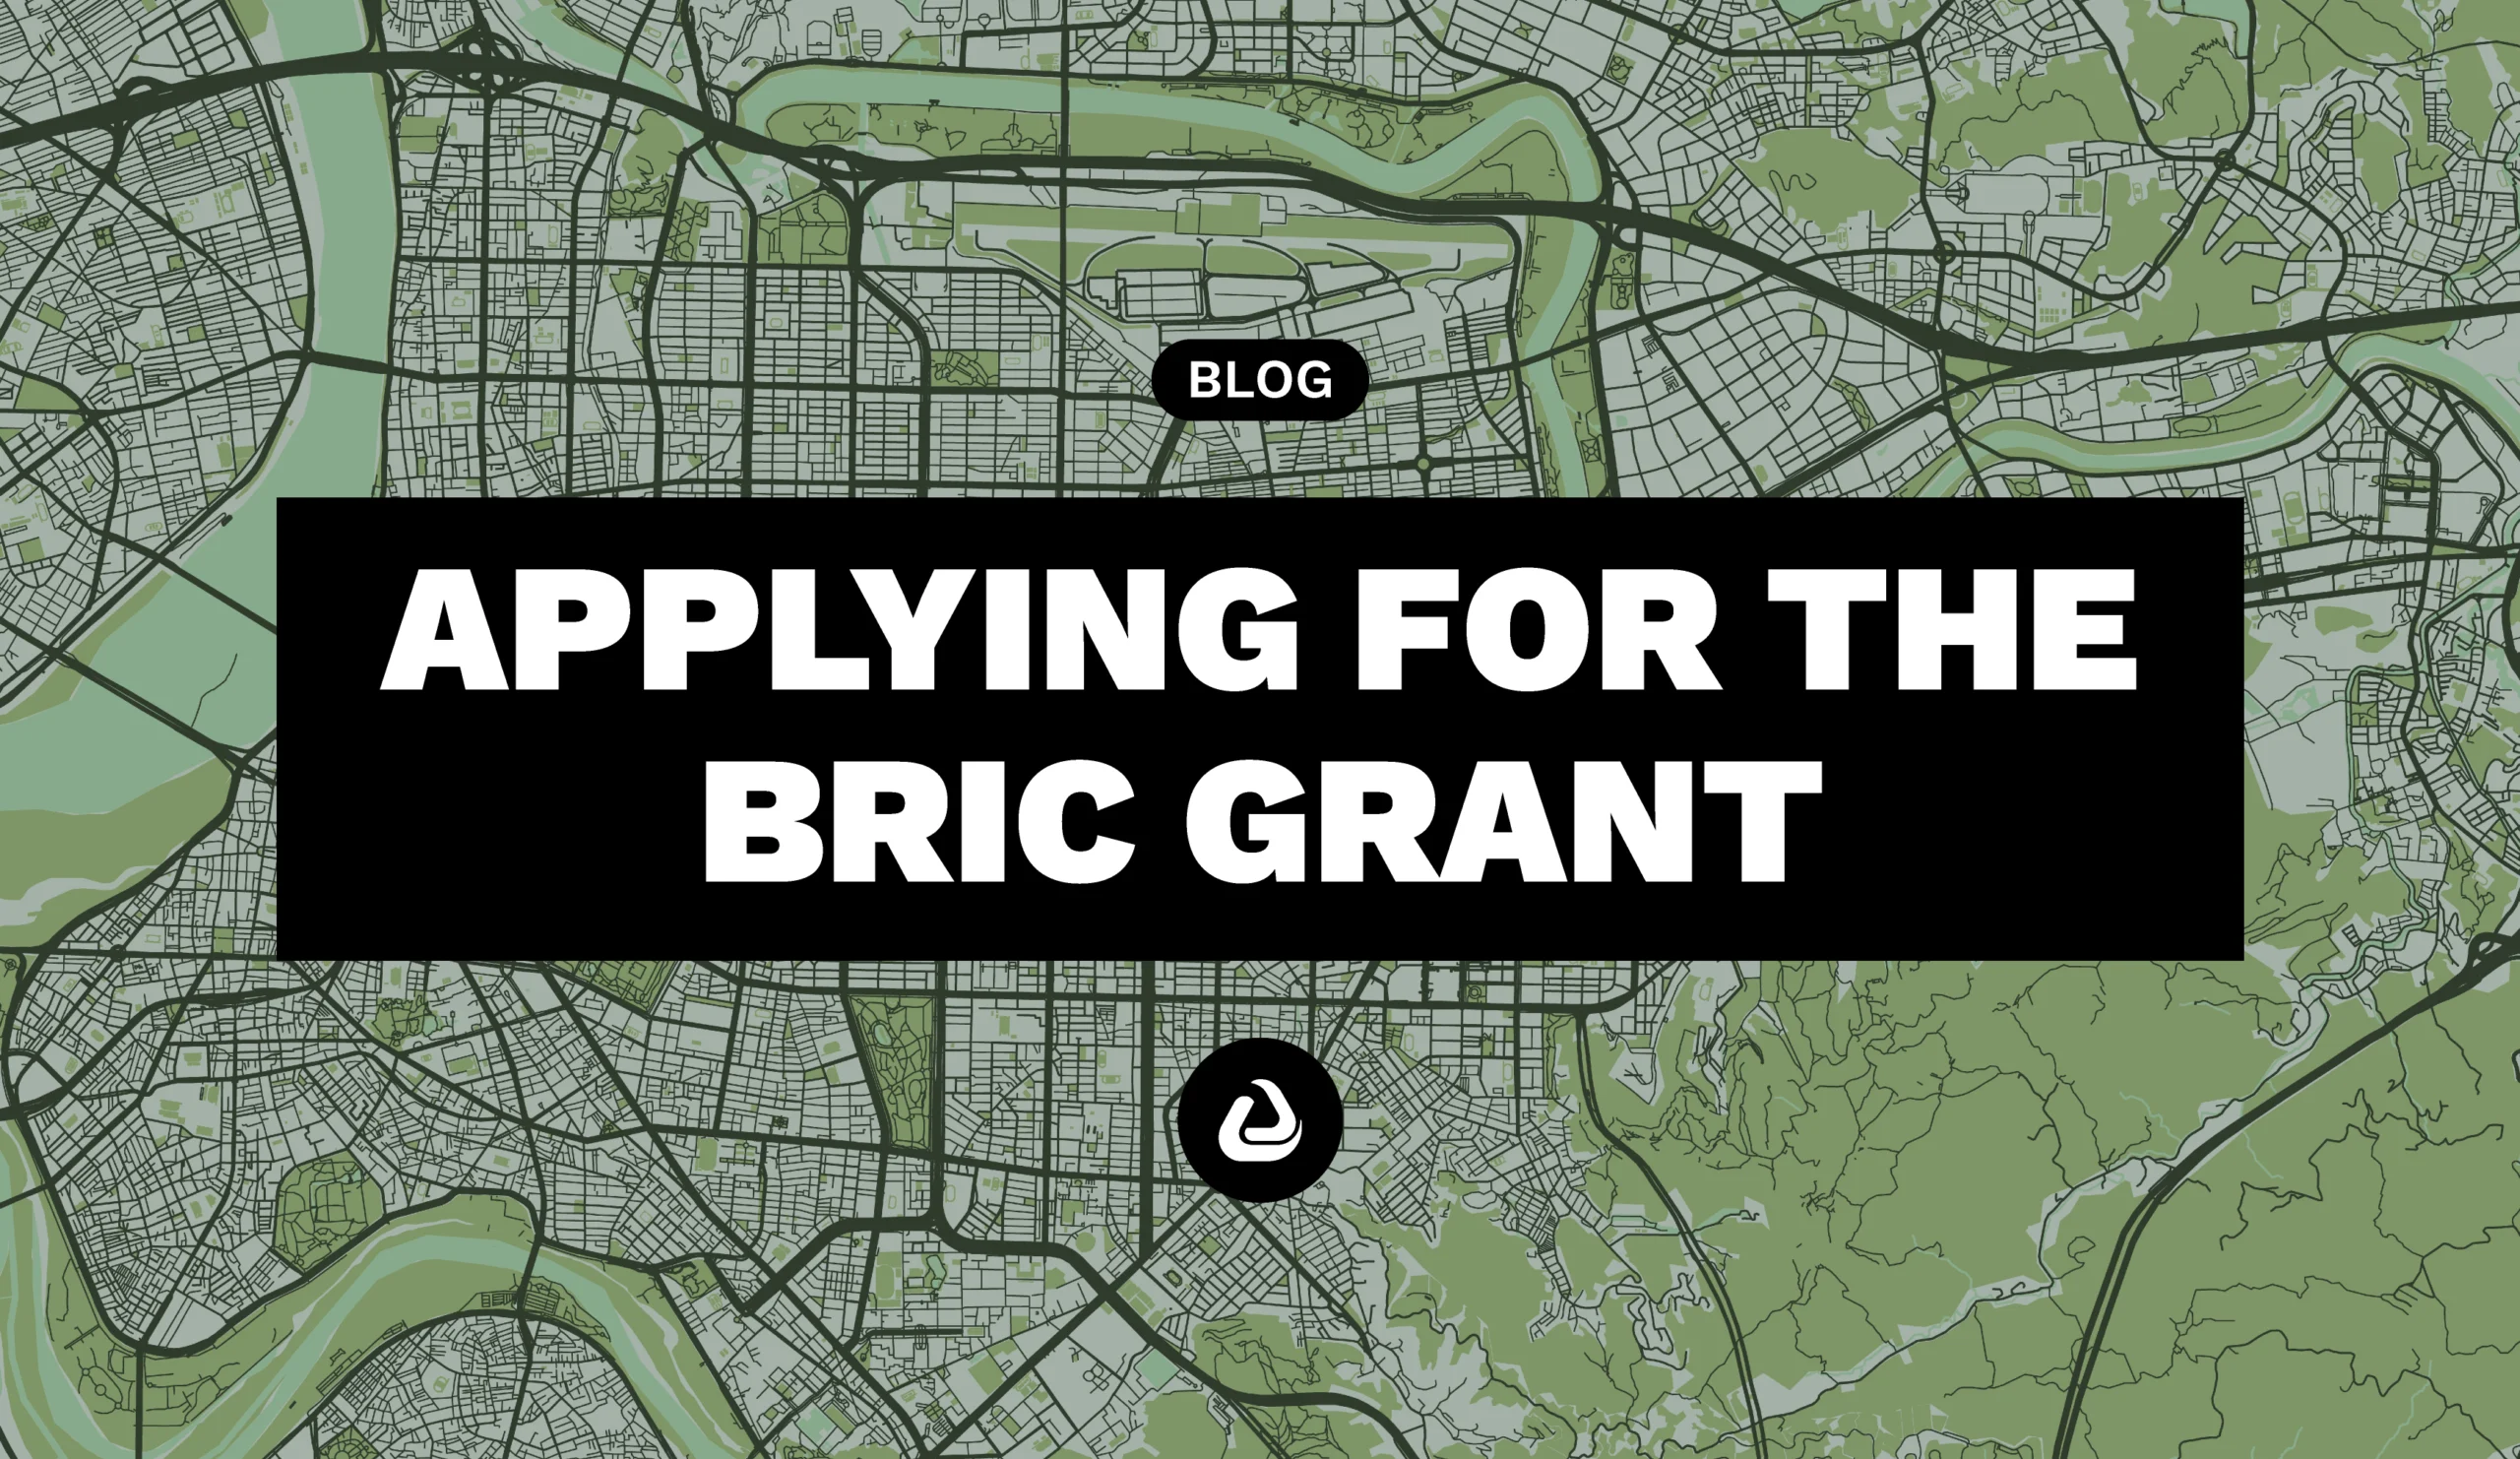 Apply for the BRIC grant